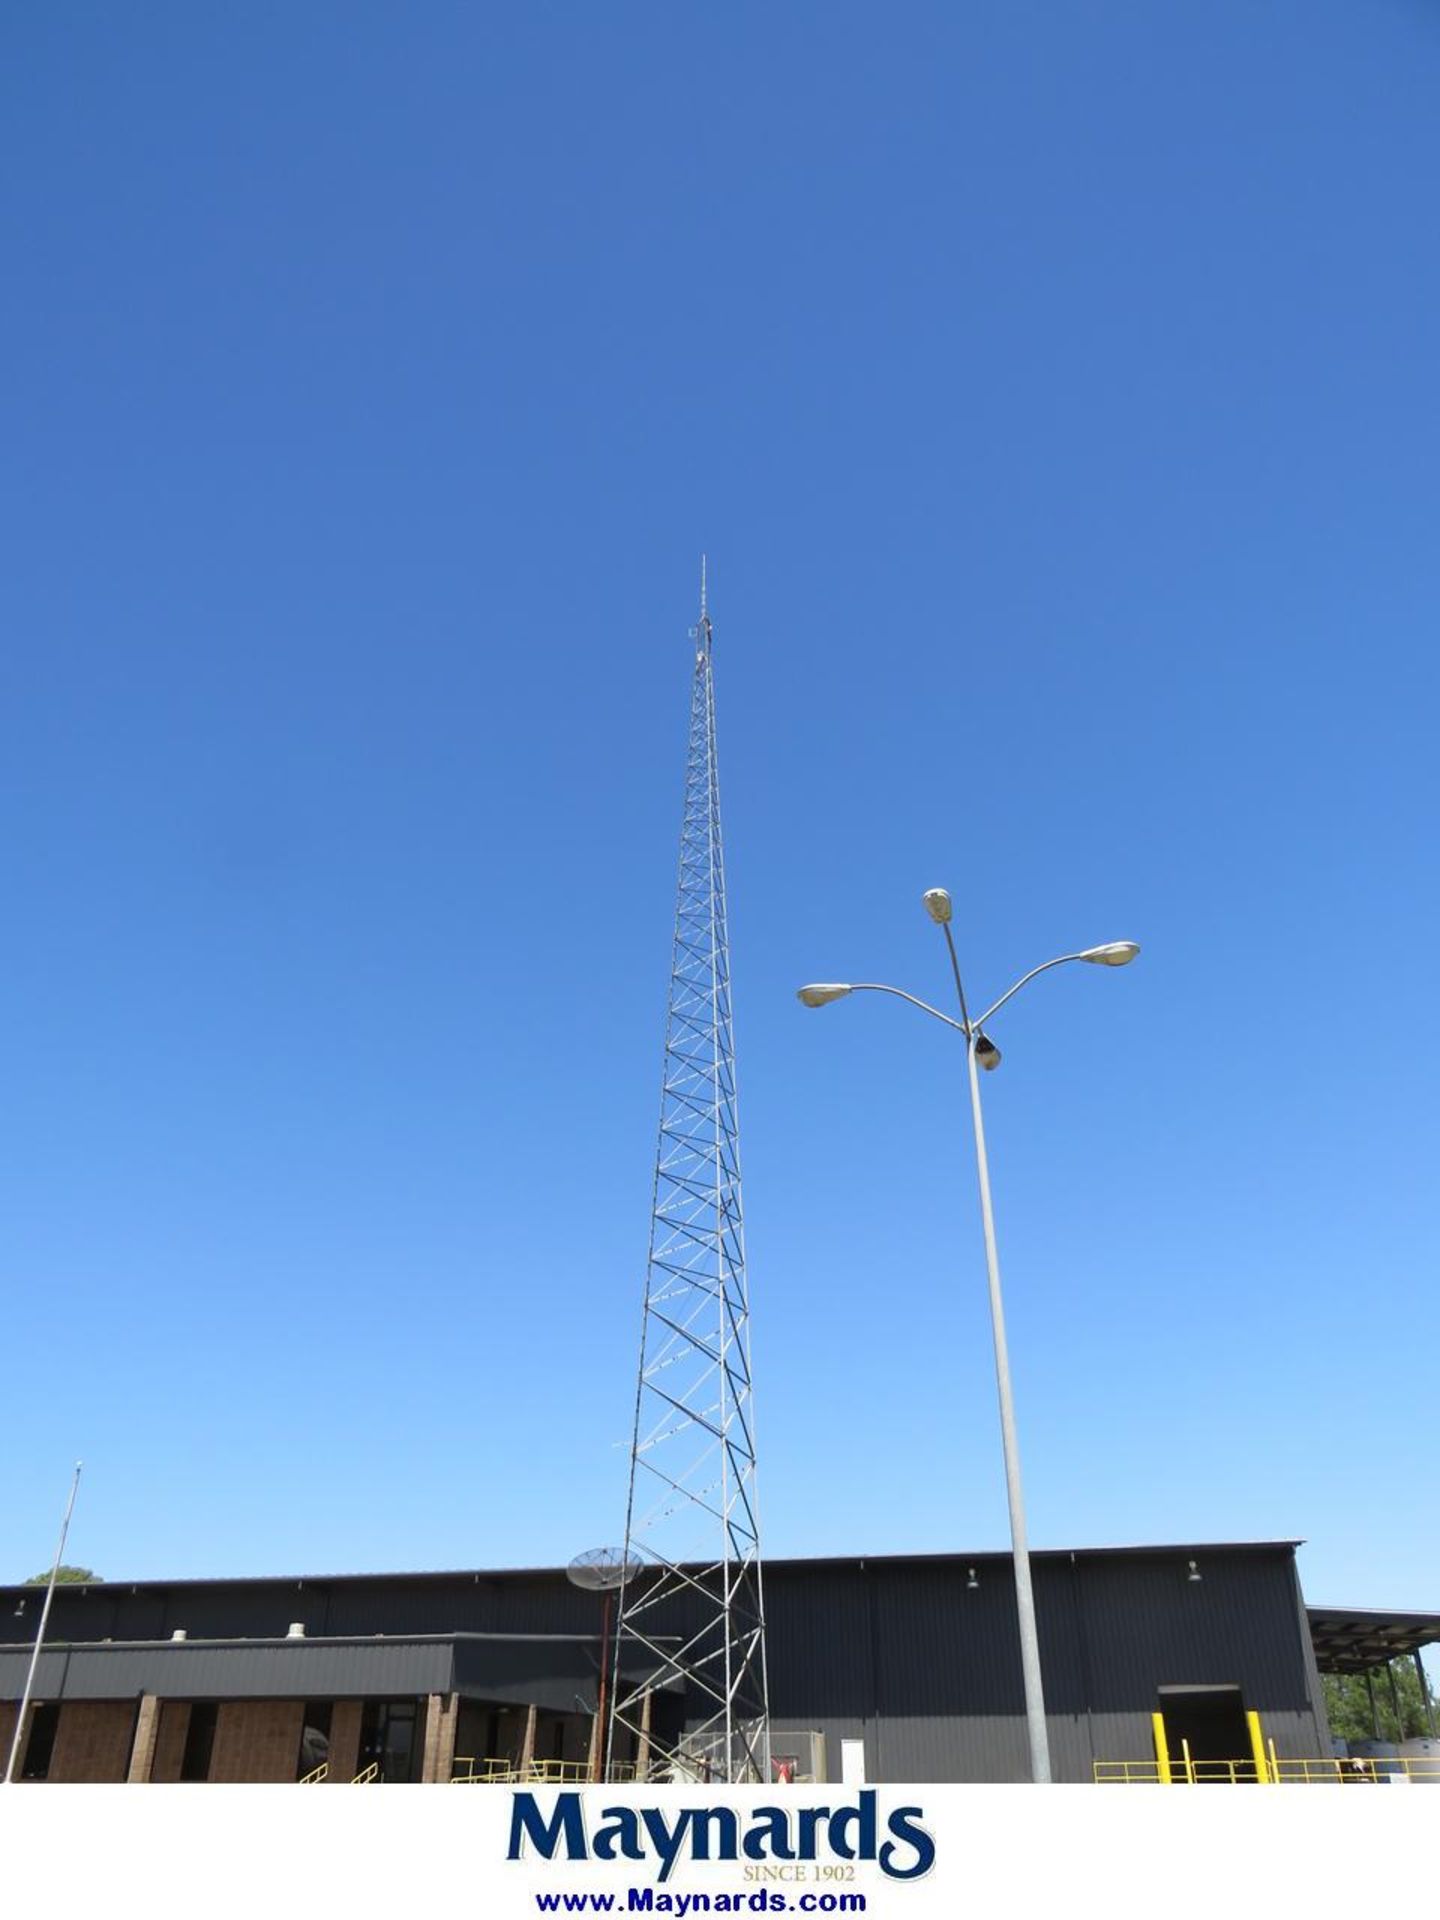 Approx. 200' High Communications Tower - Image 3 of 8